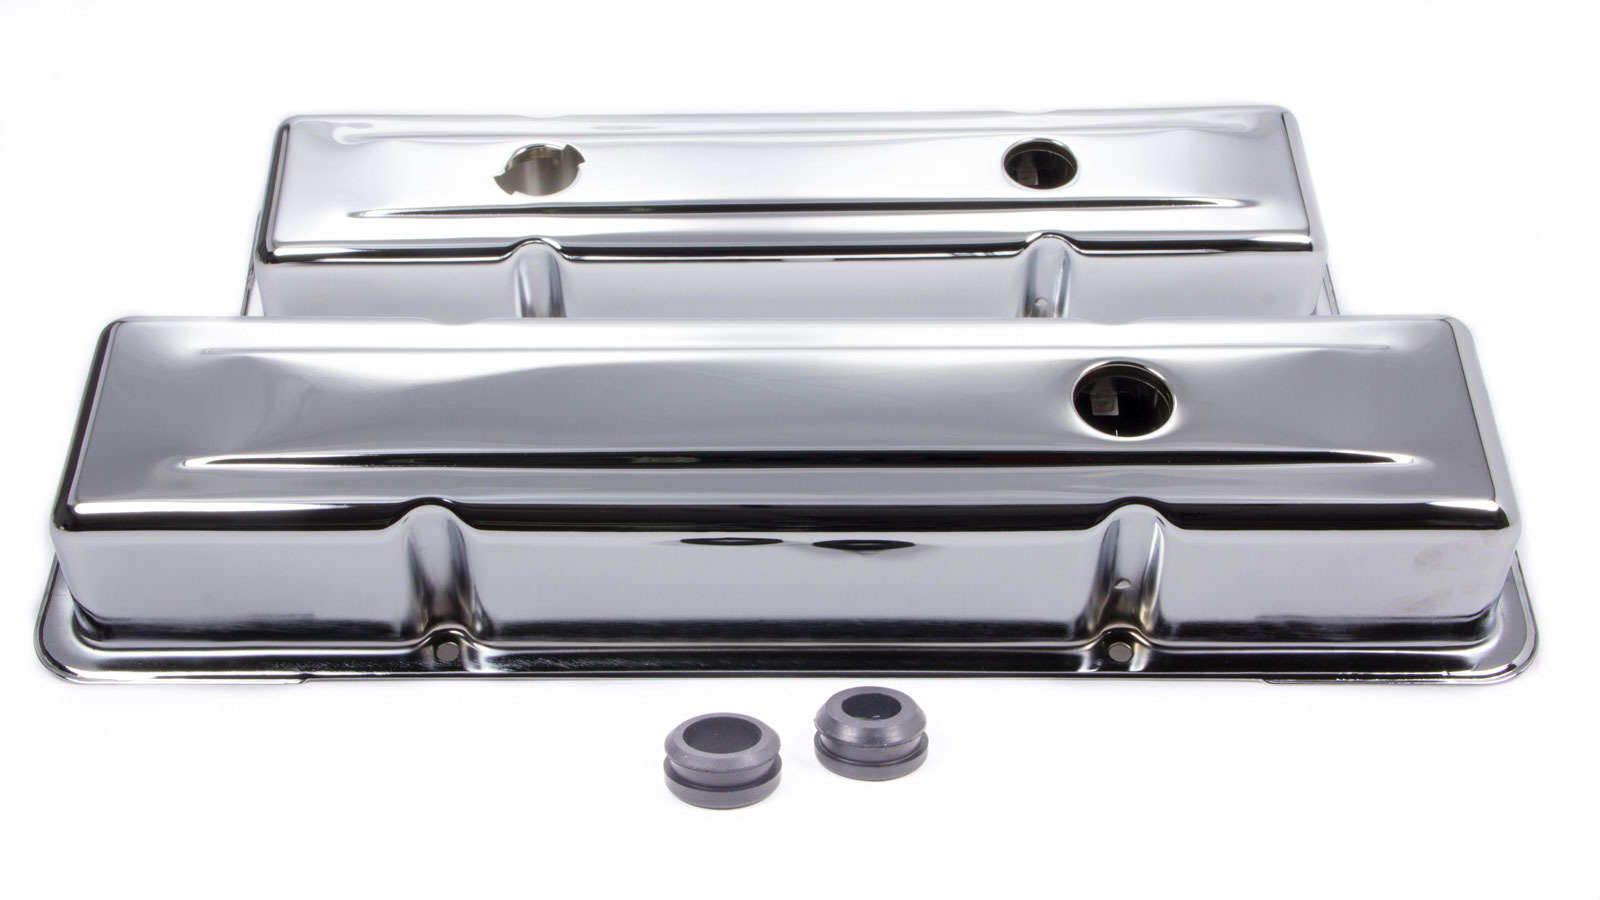 Racing Power Company R9518 Valve Cover, Short, 2-5/8 in Height, Baffled, Breather Holes, Grommets Included, Steel, Chrome, Small Block Chevy, Pair